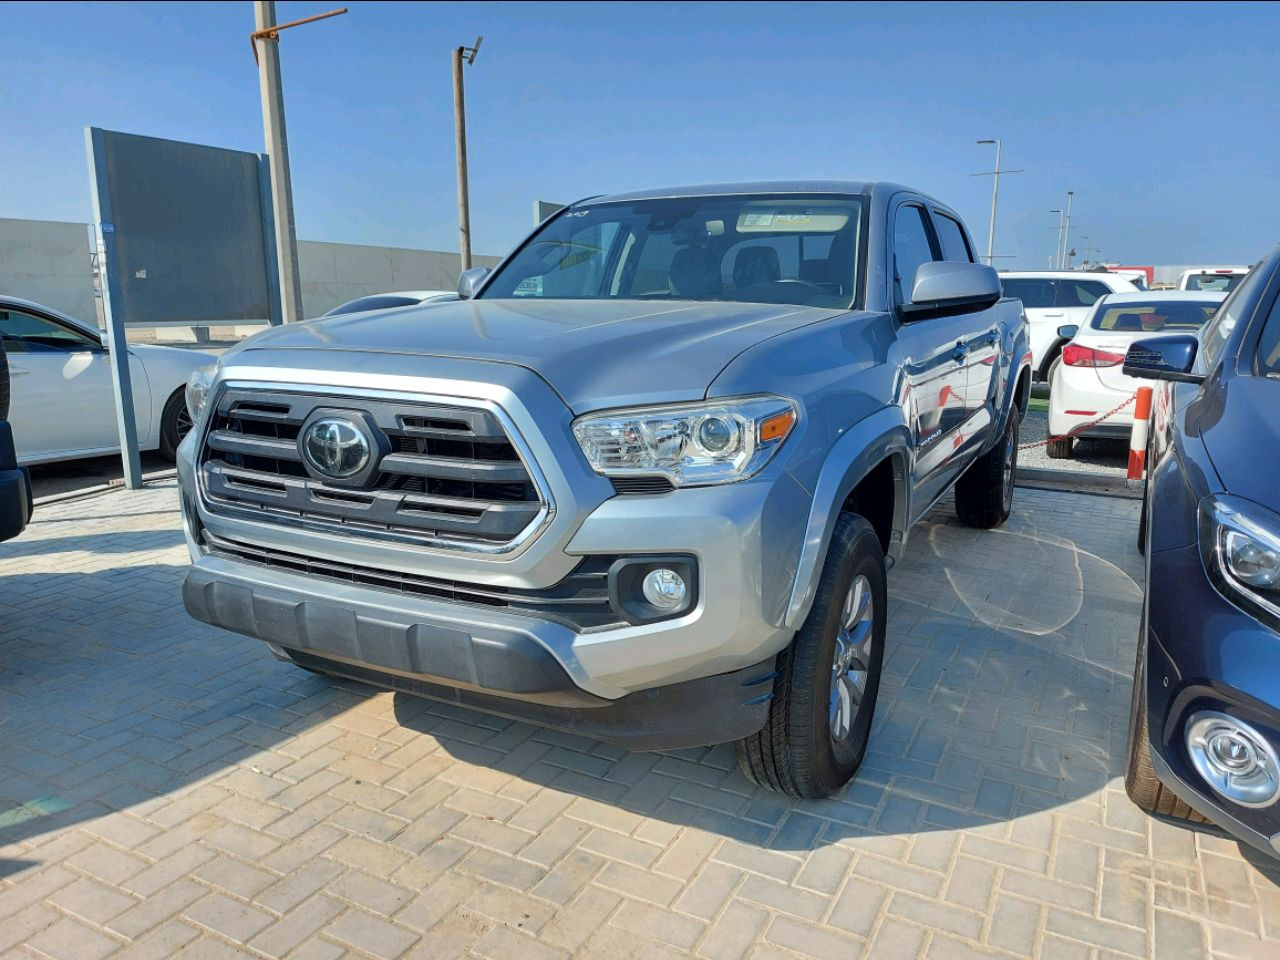 Toyota Tacoma 2019 AED 85,000, Good condition, Warranty, Full Option, US Spec, Navigation System, Fog Lights, Negotiable